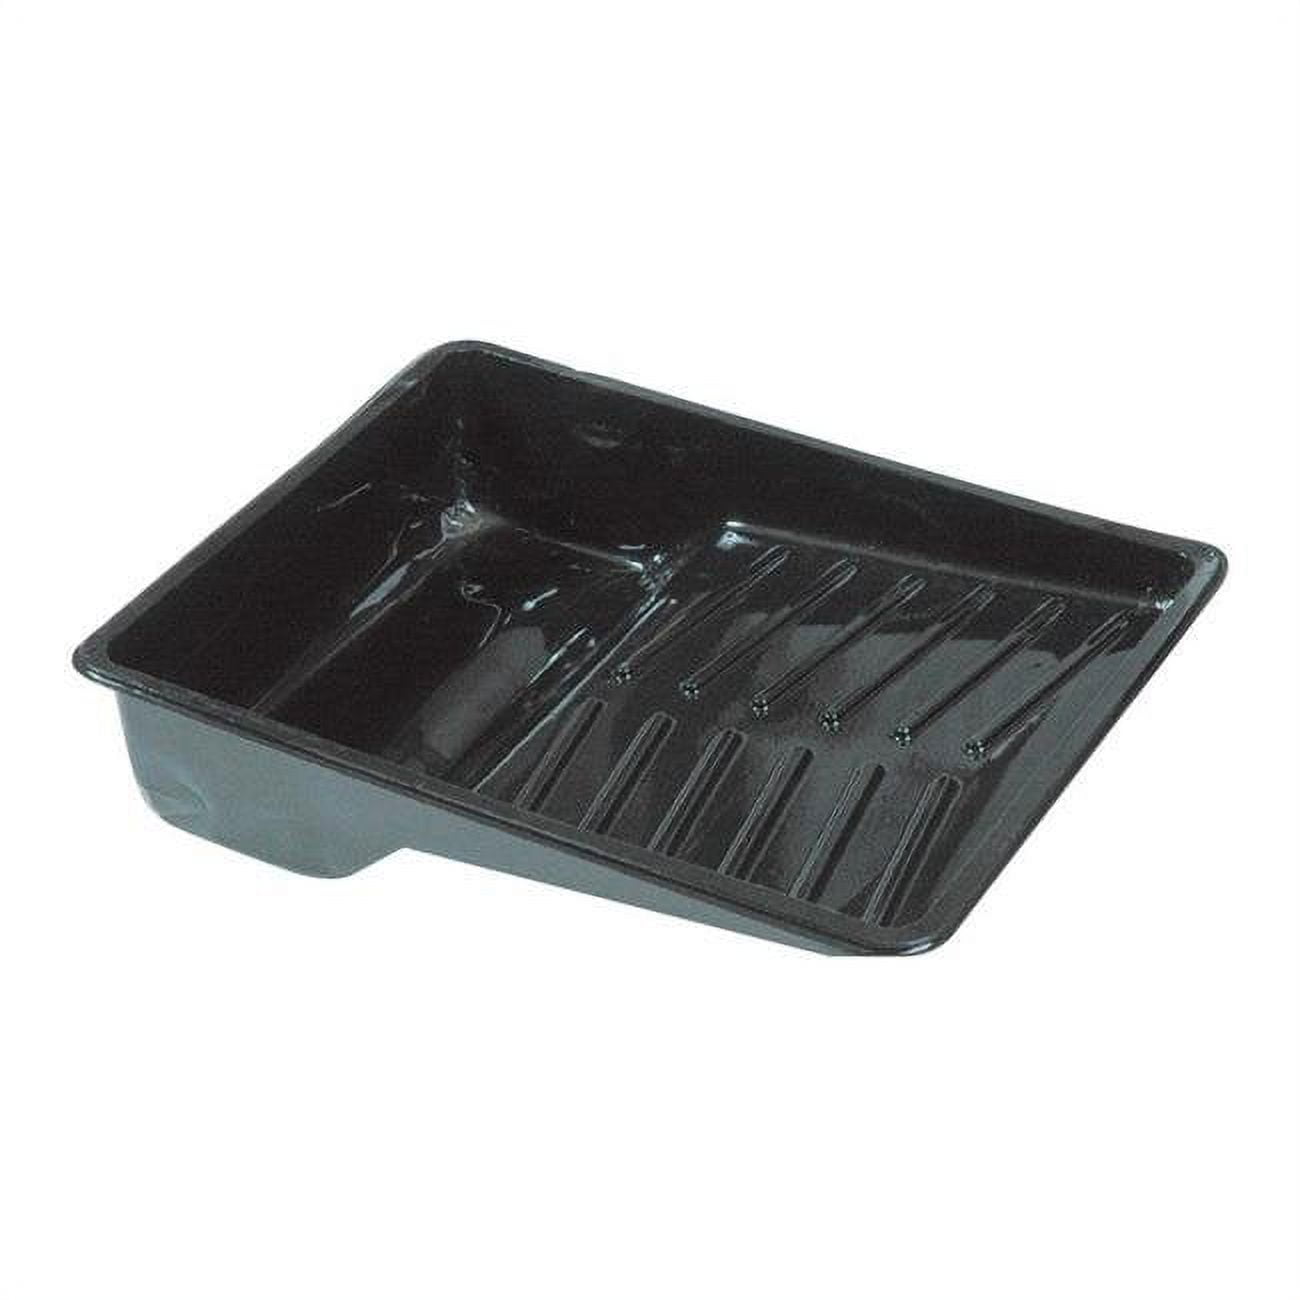 1895663 Plastic 11.88 In. Paint Tray Liner, Black - Case Of 50